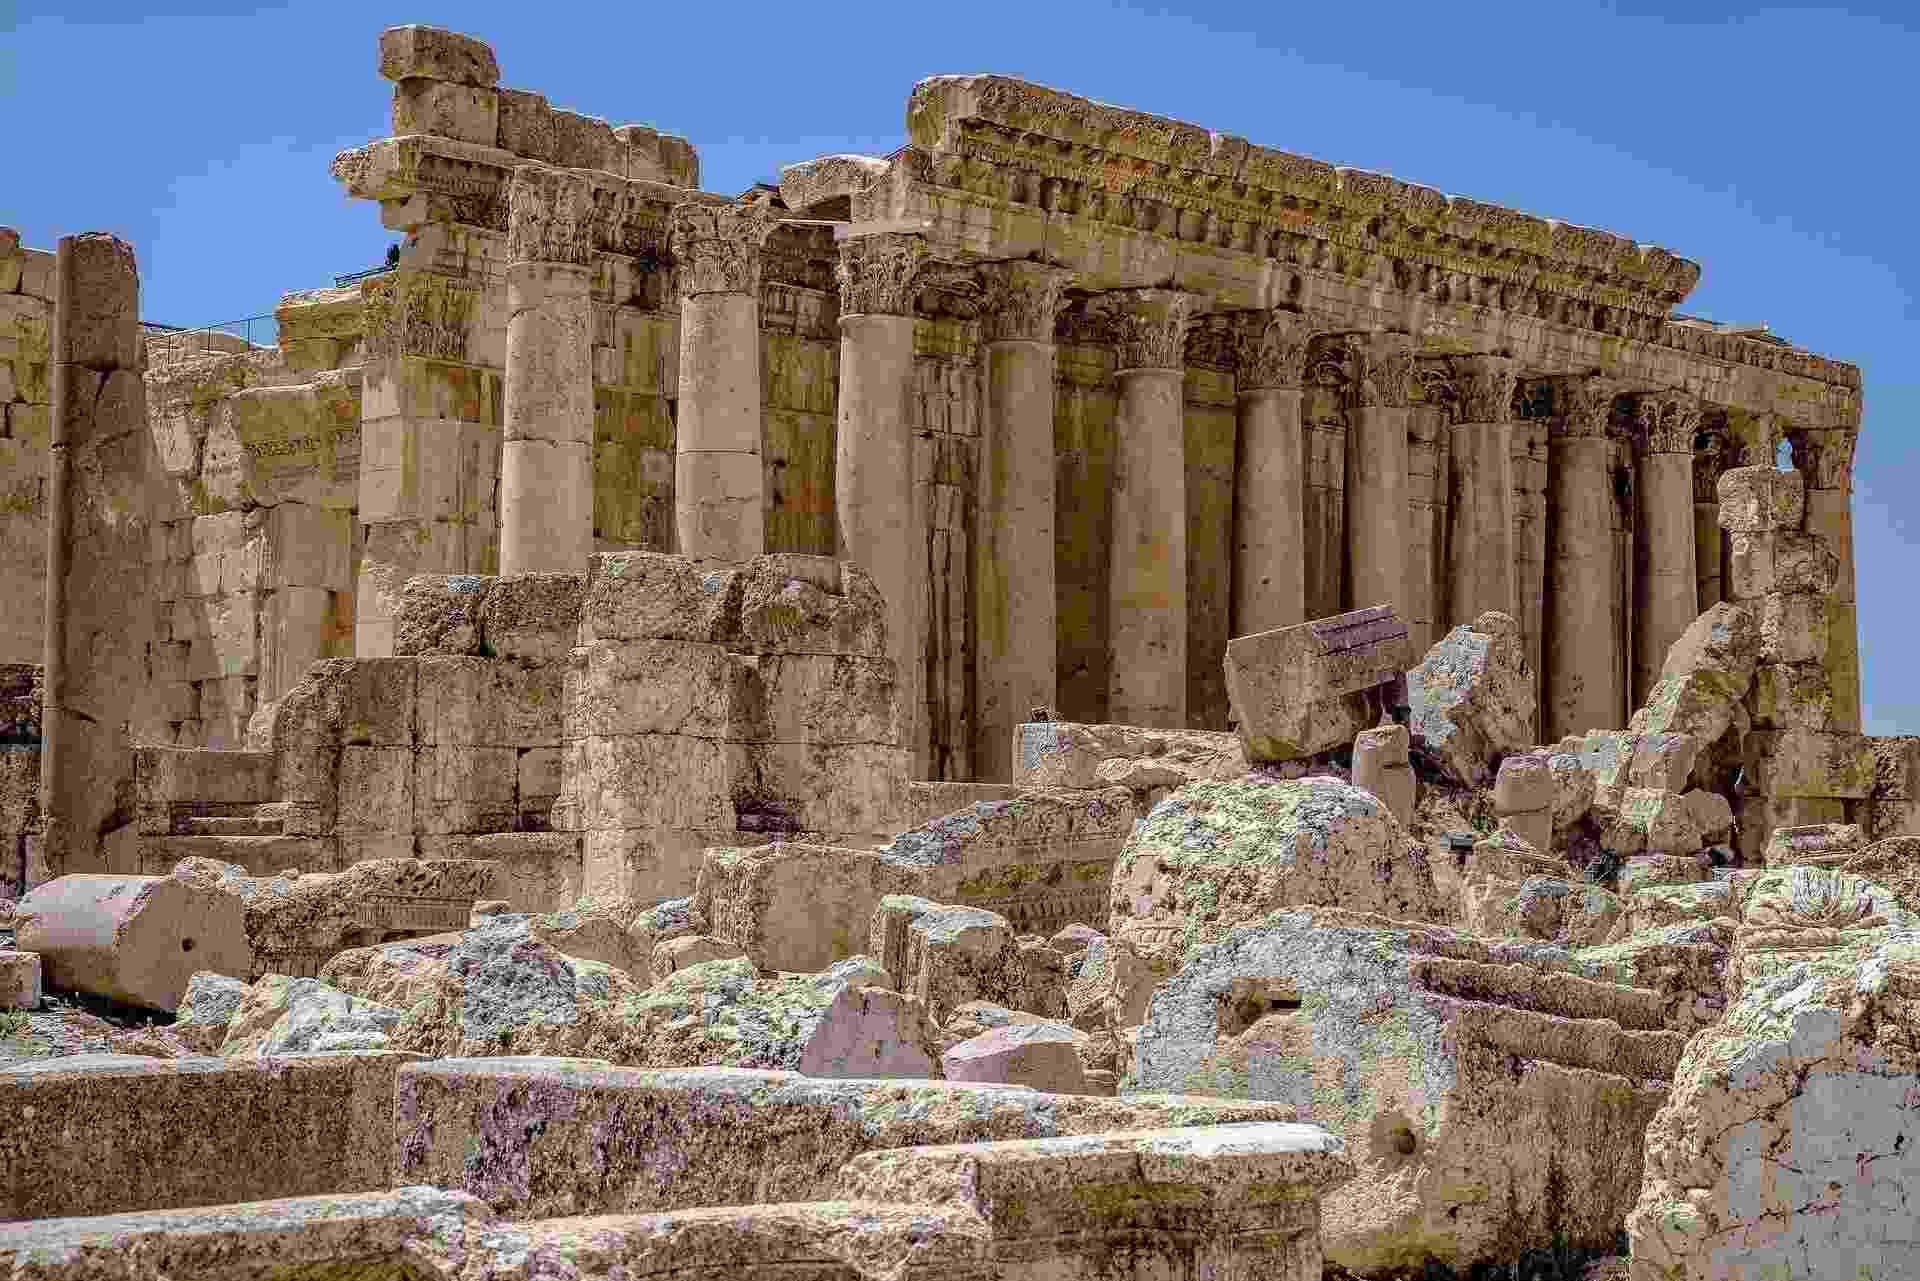 The temple of Jupiter in Lebanon is a famous tourist spot.